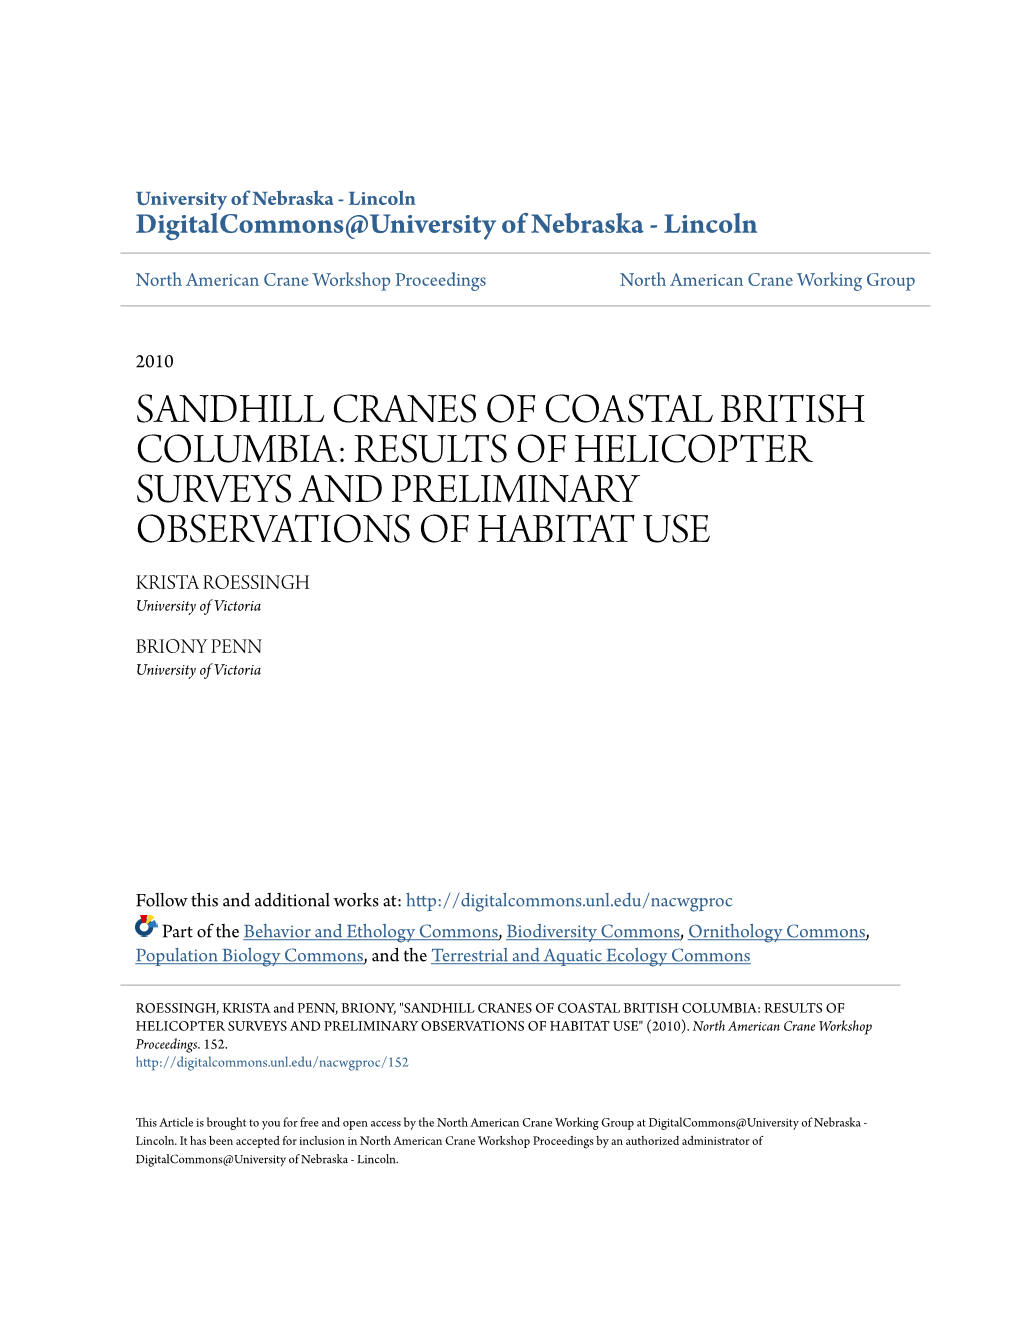 Sandhill Cranes of Coastal British Columbia: Results of Helicopter Surveys and Preliminary Observations of Habitat Use" (2010)